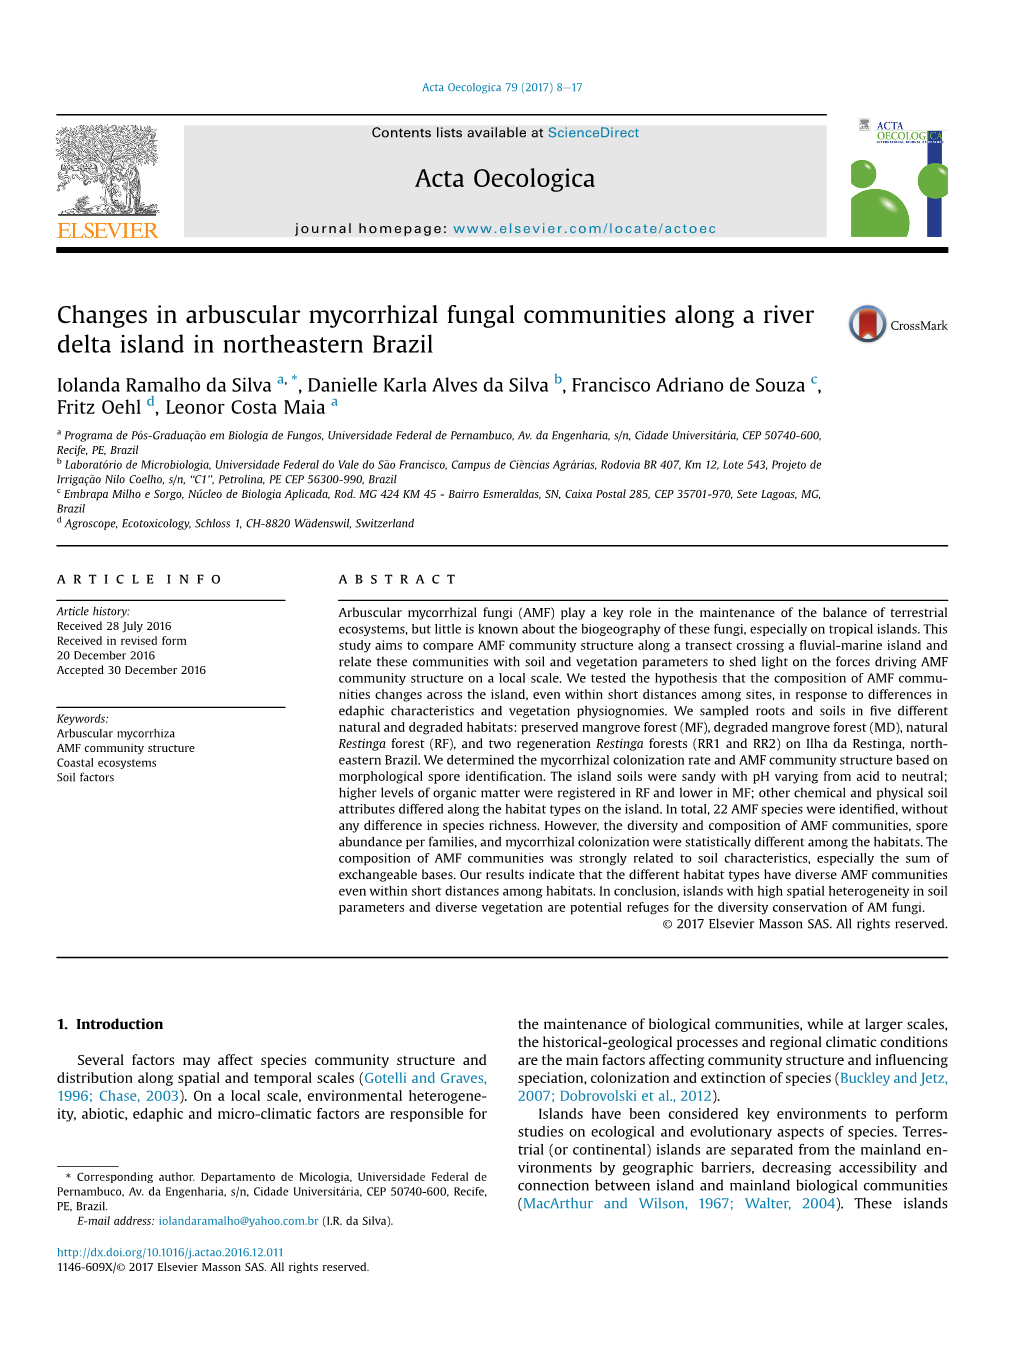 Changes in Arbuscular Mycorrhizal Fungal Communities Along a River Delta Island in Northeastern Brazil